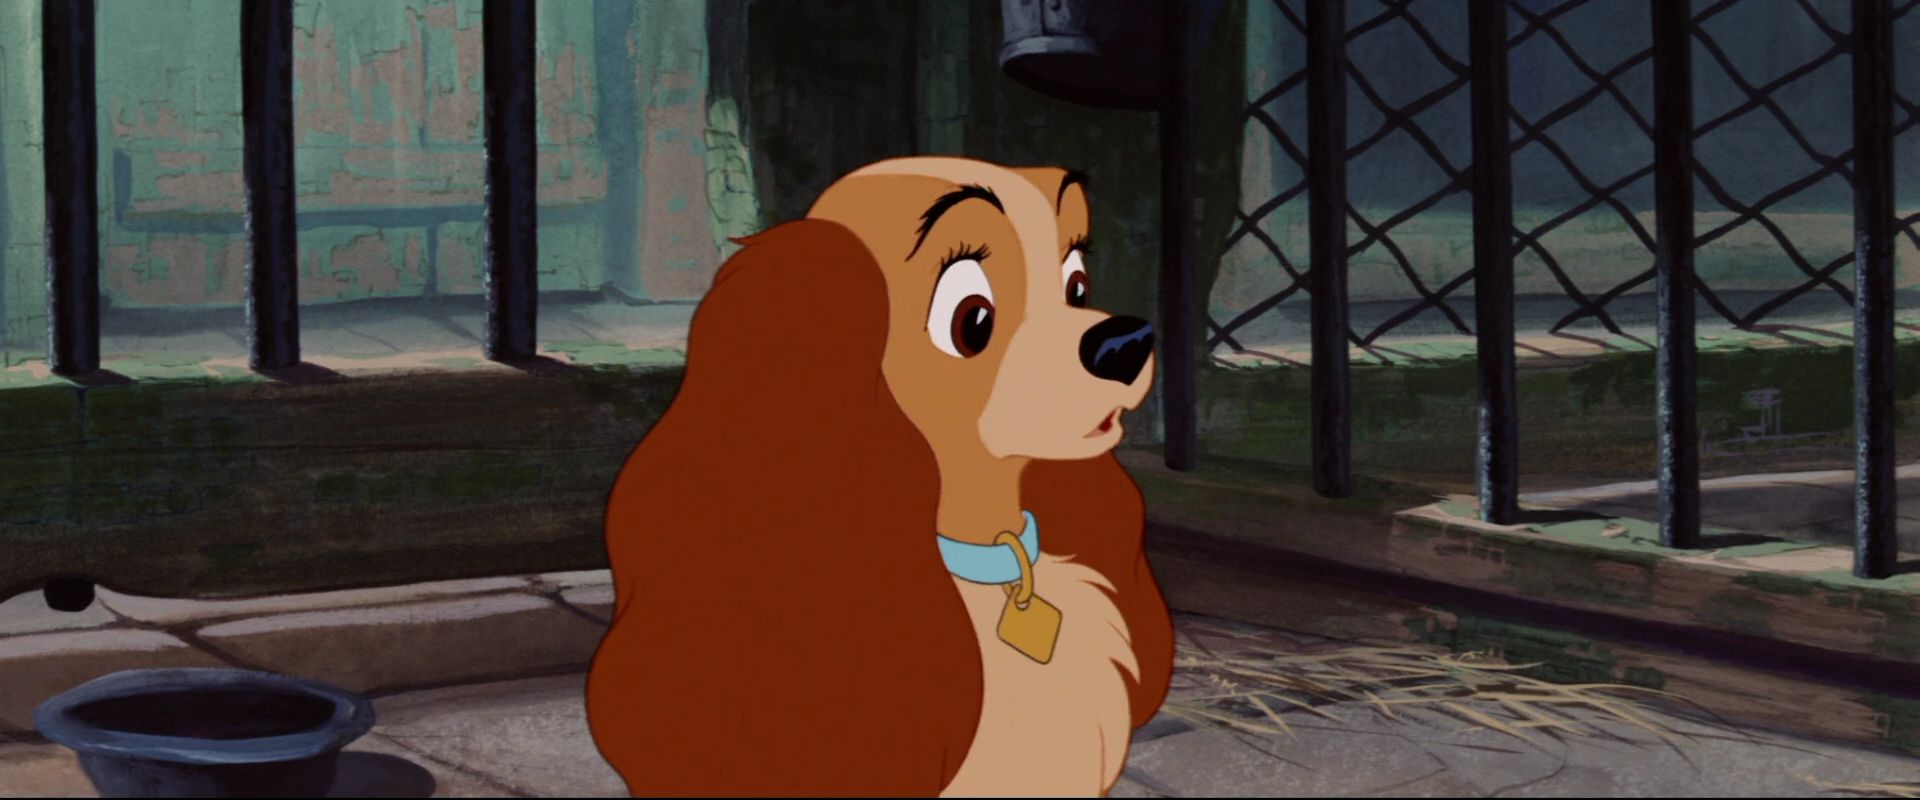 Lady and the Tramp – 1955  Not Another Disney Critique - a 1950s Review